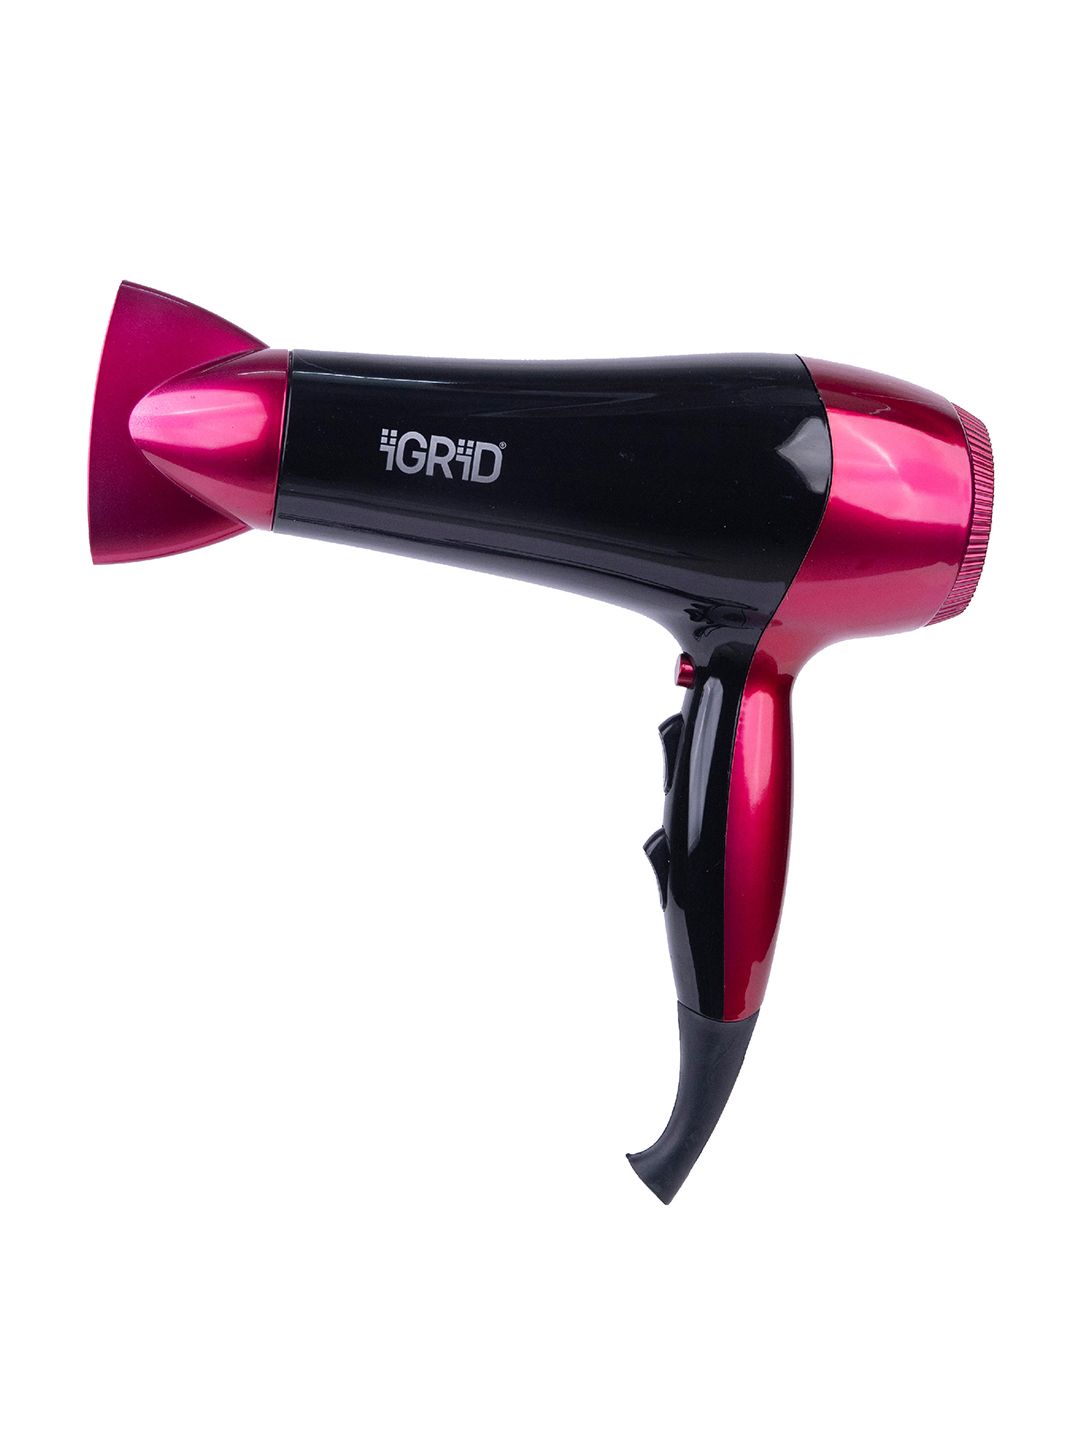 iGRiD BLHC-1687 Professional Powerful Hair Dryer 2200W Detachable Concentrator - Red Price in India